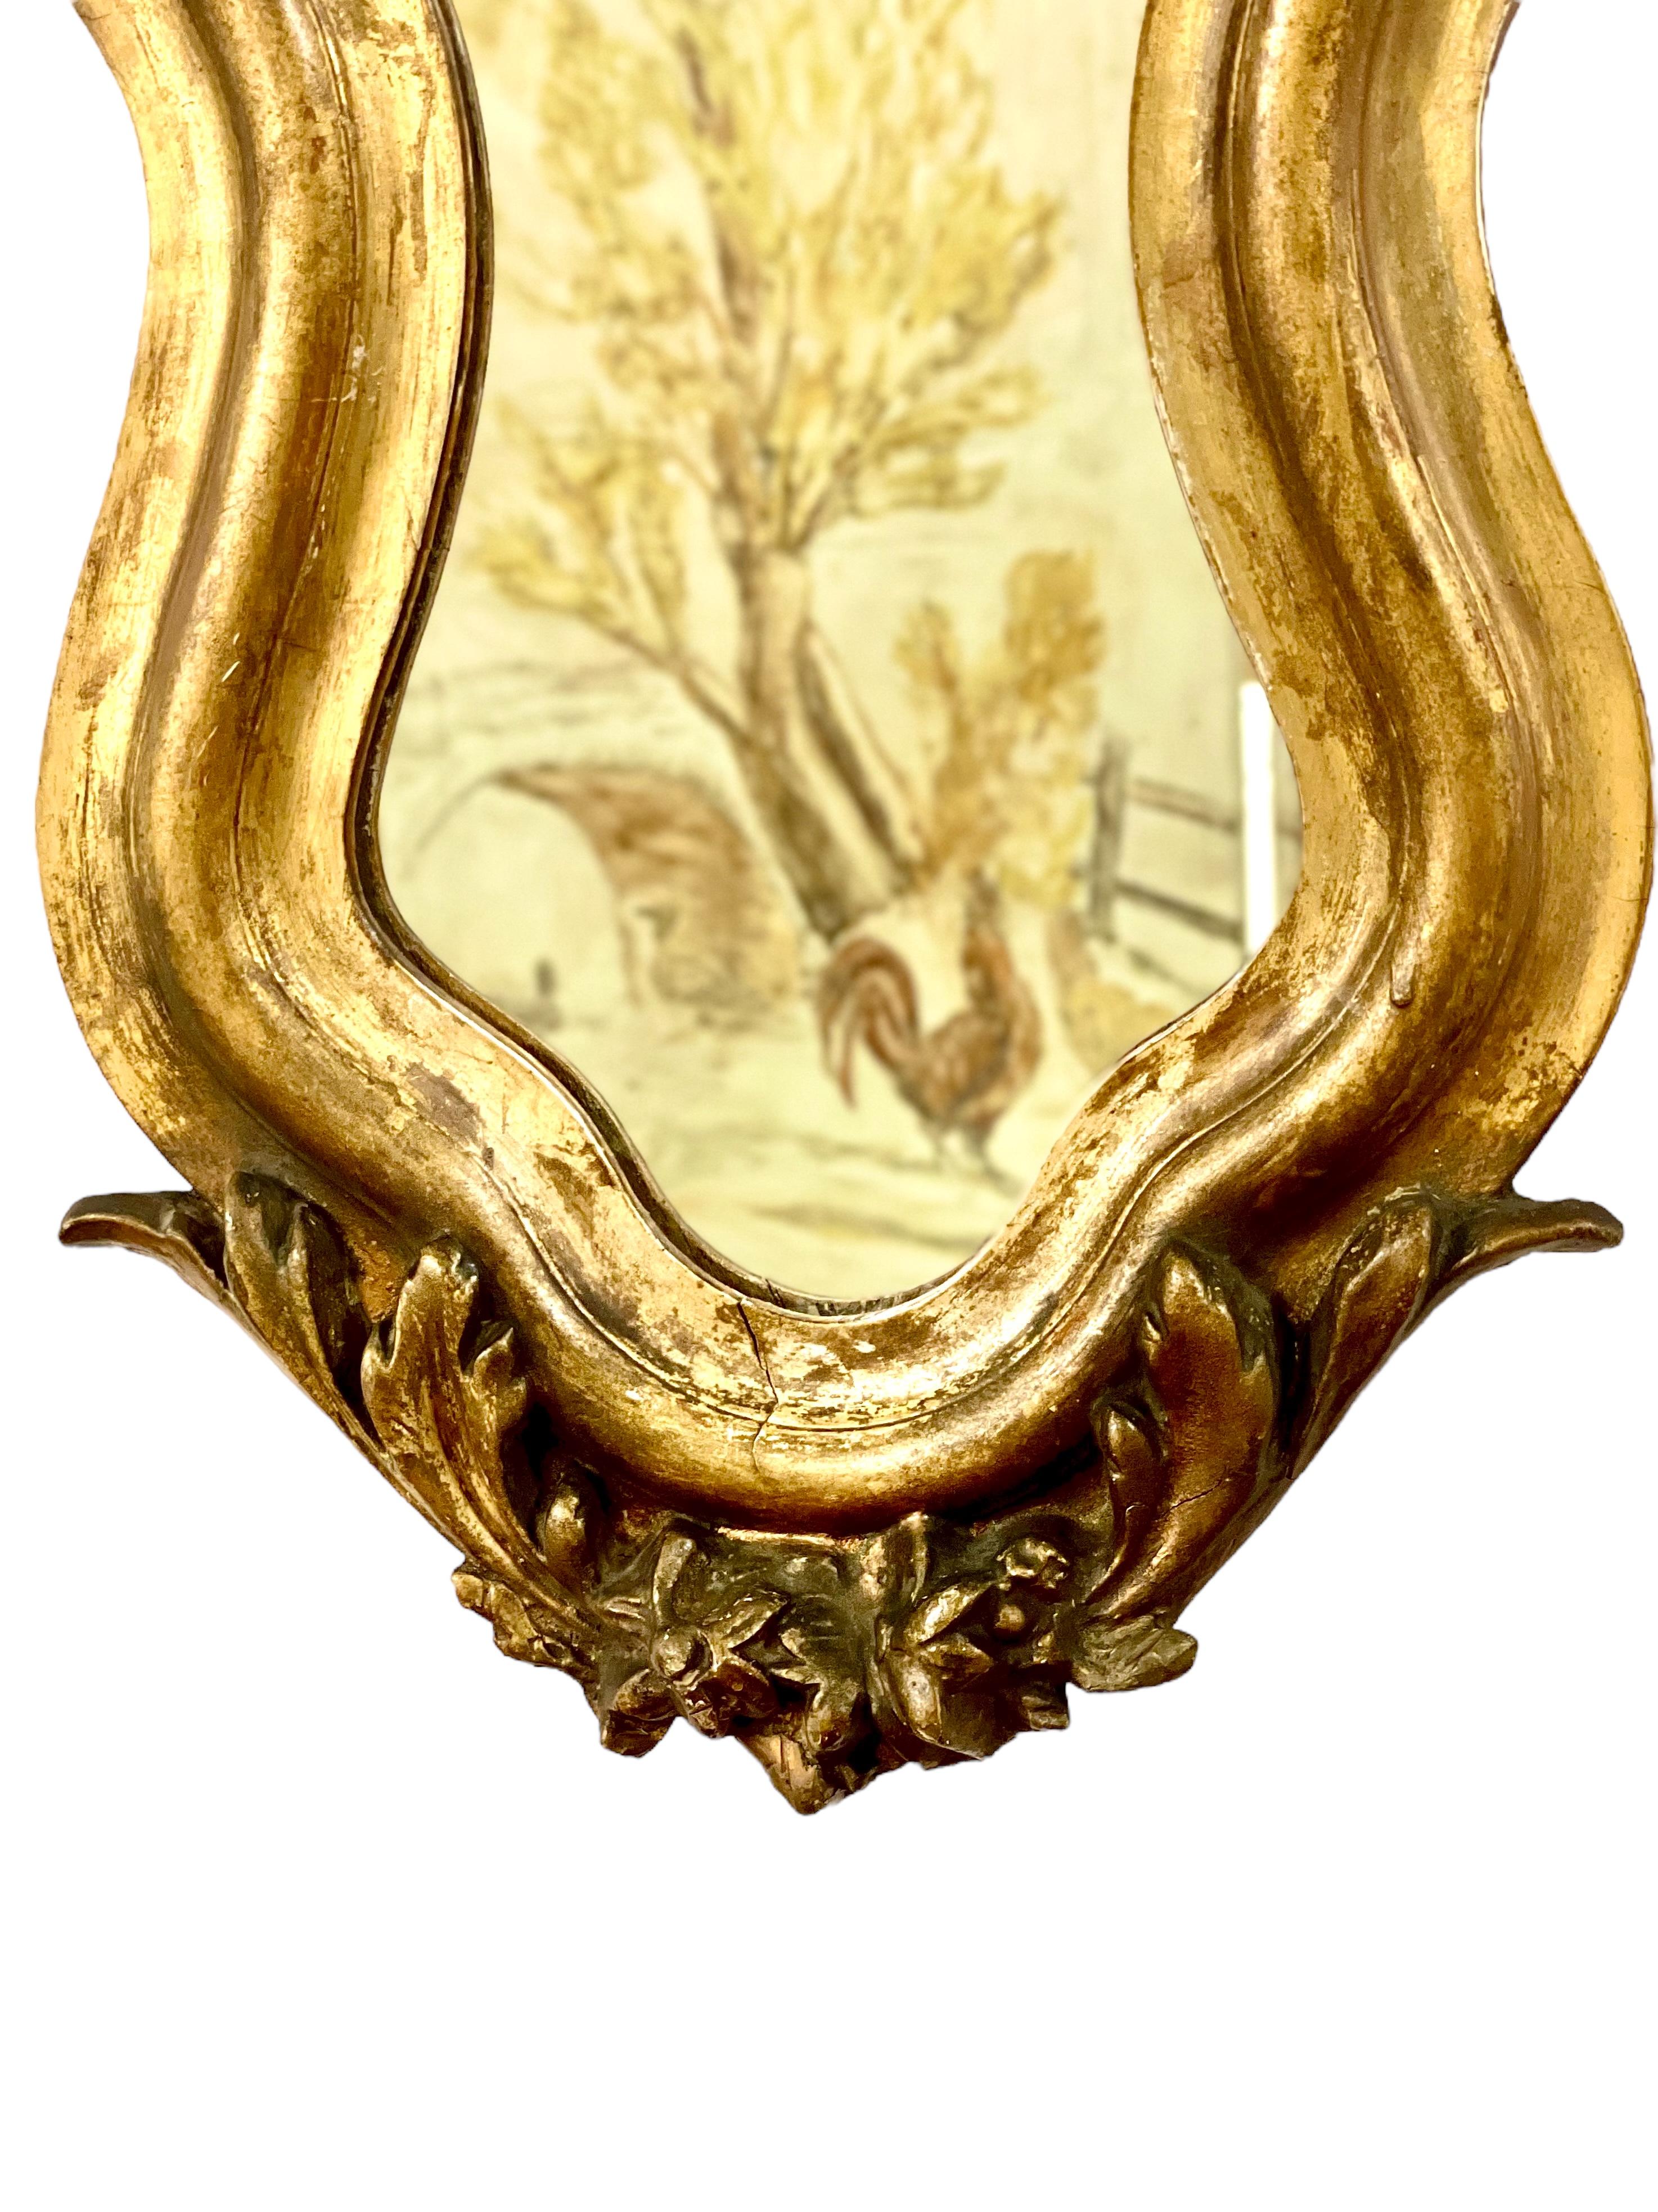 This superb 19th century giltwood wall mirror, with its curvaceous violin shape and exuberant Rococo style decoration, would add a gleaming golden accent to any room. Its spectacular frame features hand-carved acanthus scrolls on its sides and lower